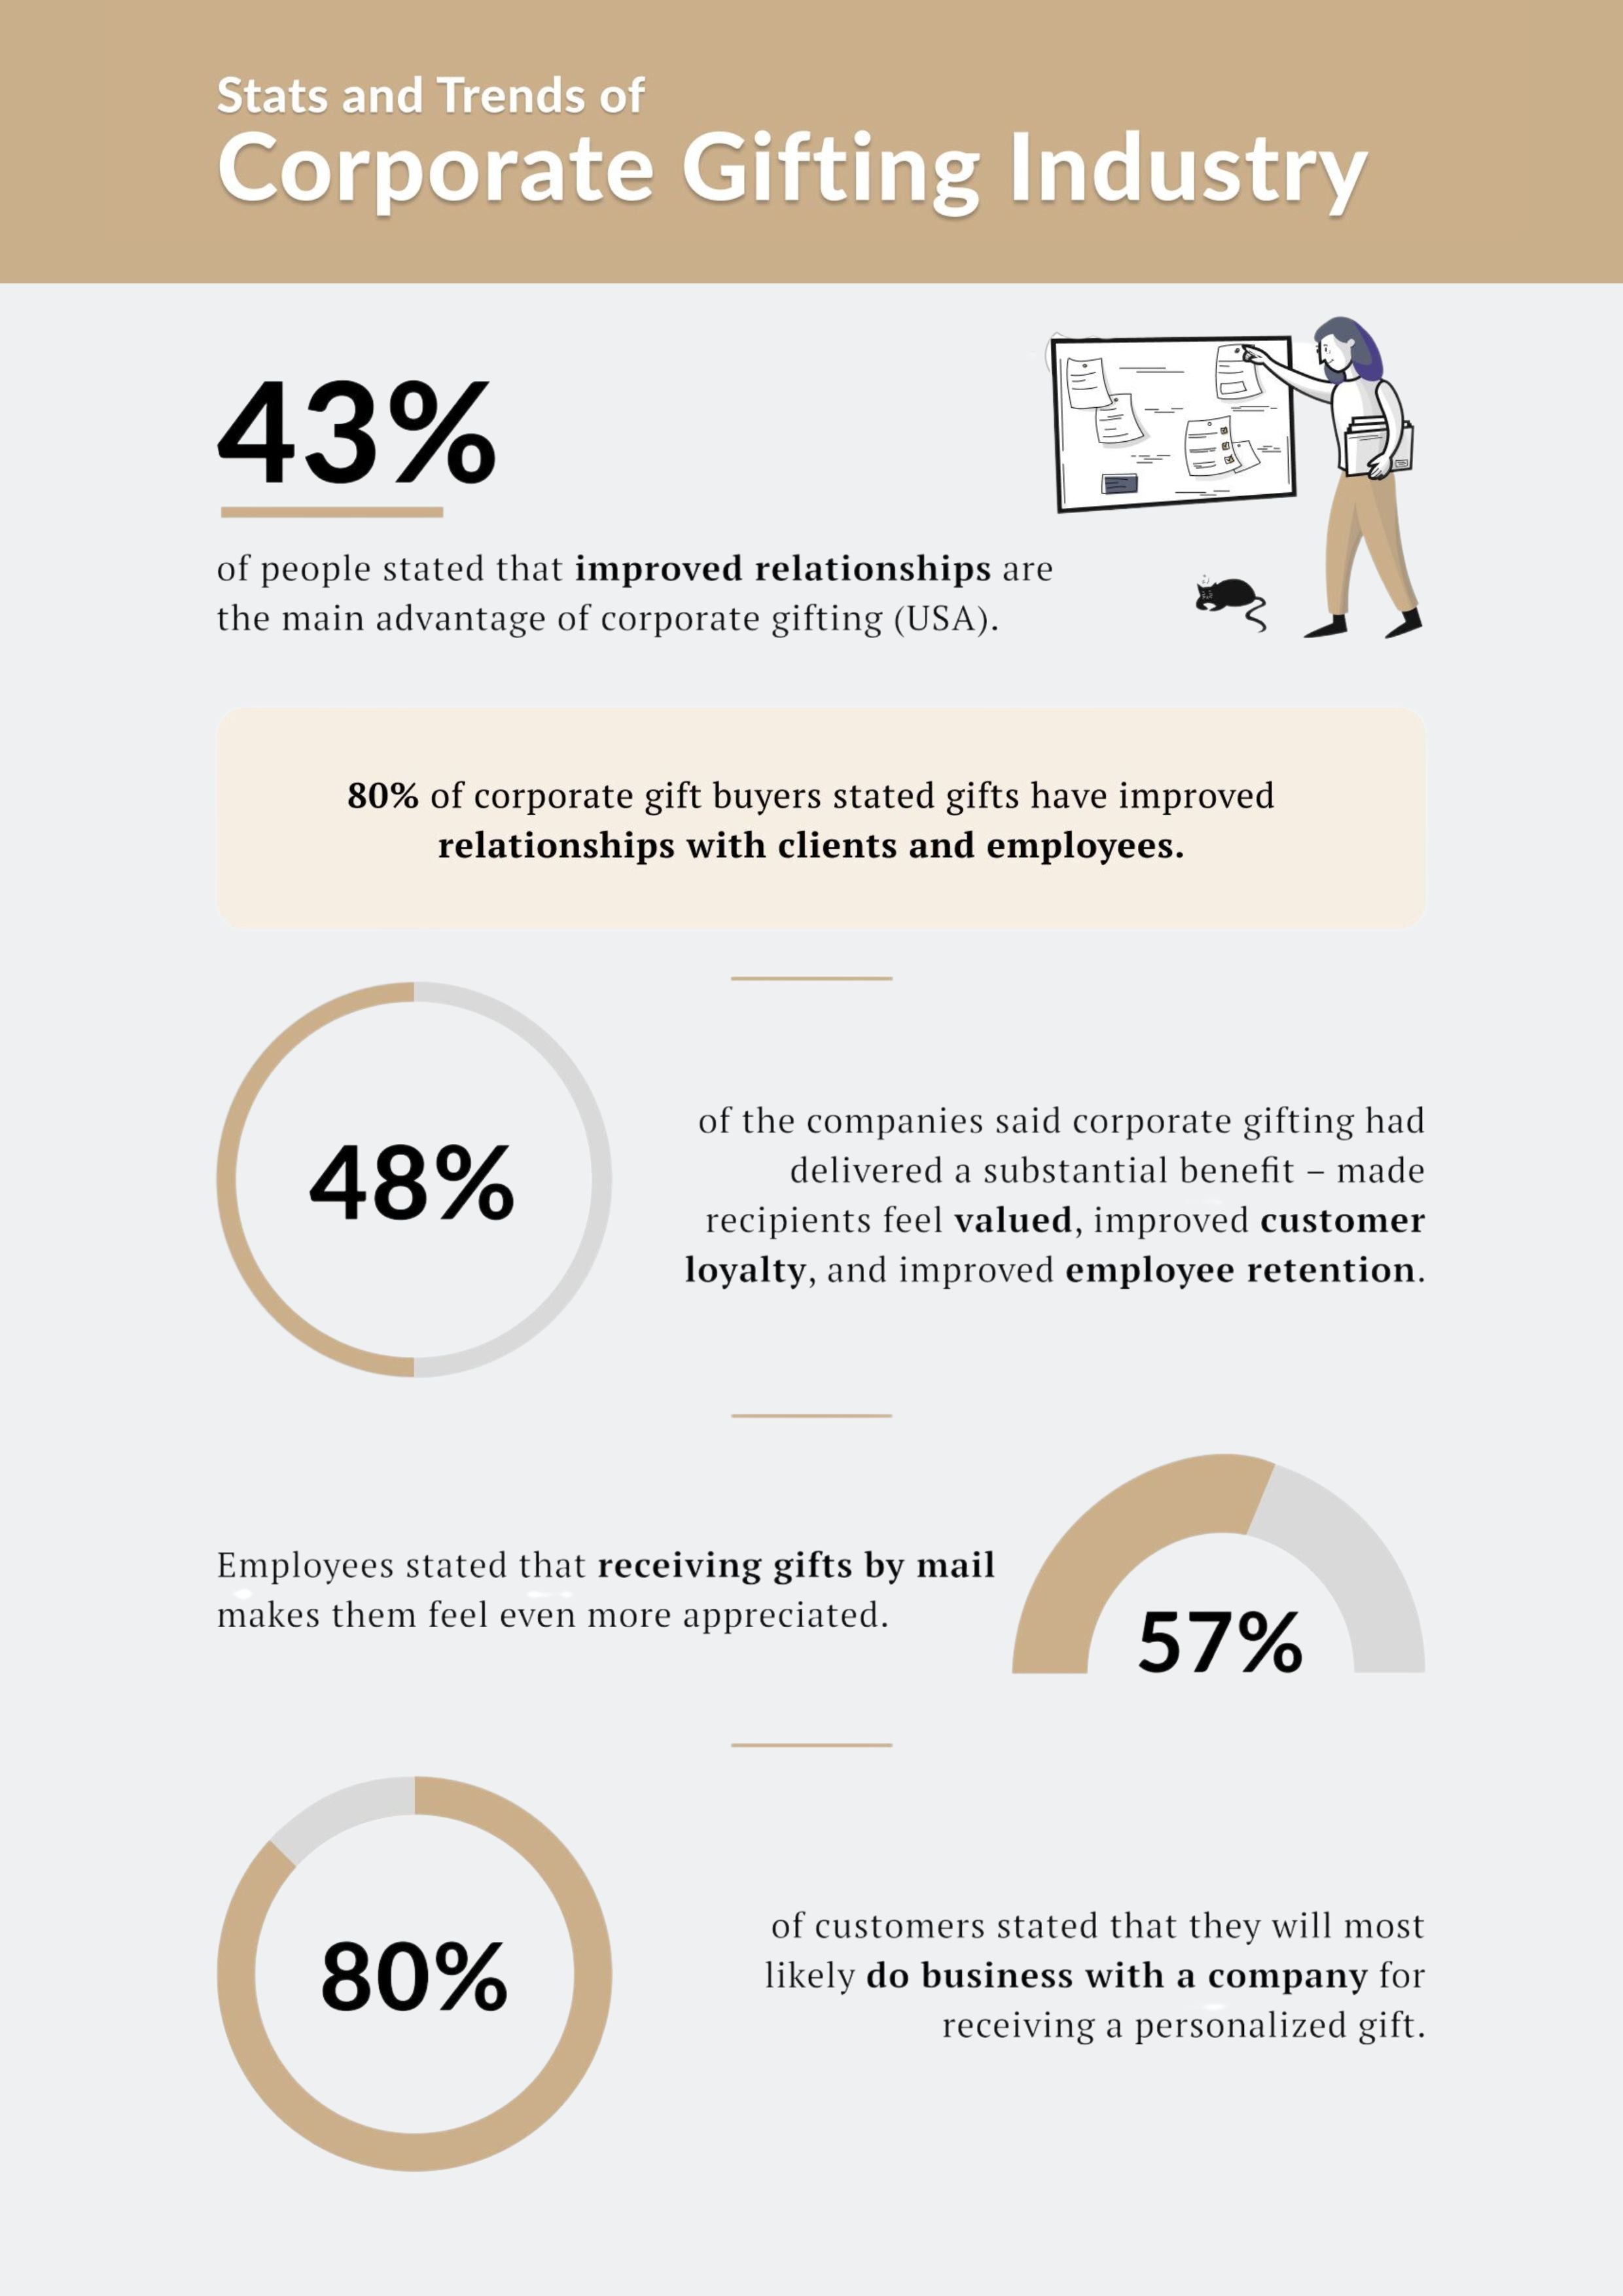 What Is Corporate Gifting? Why Is It Important?